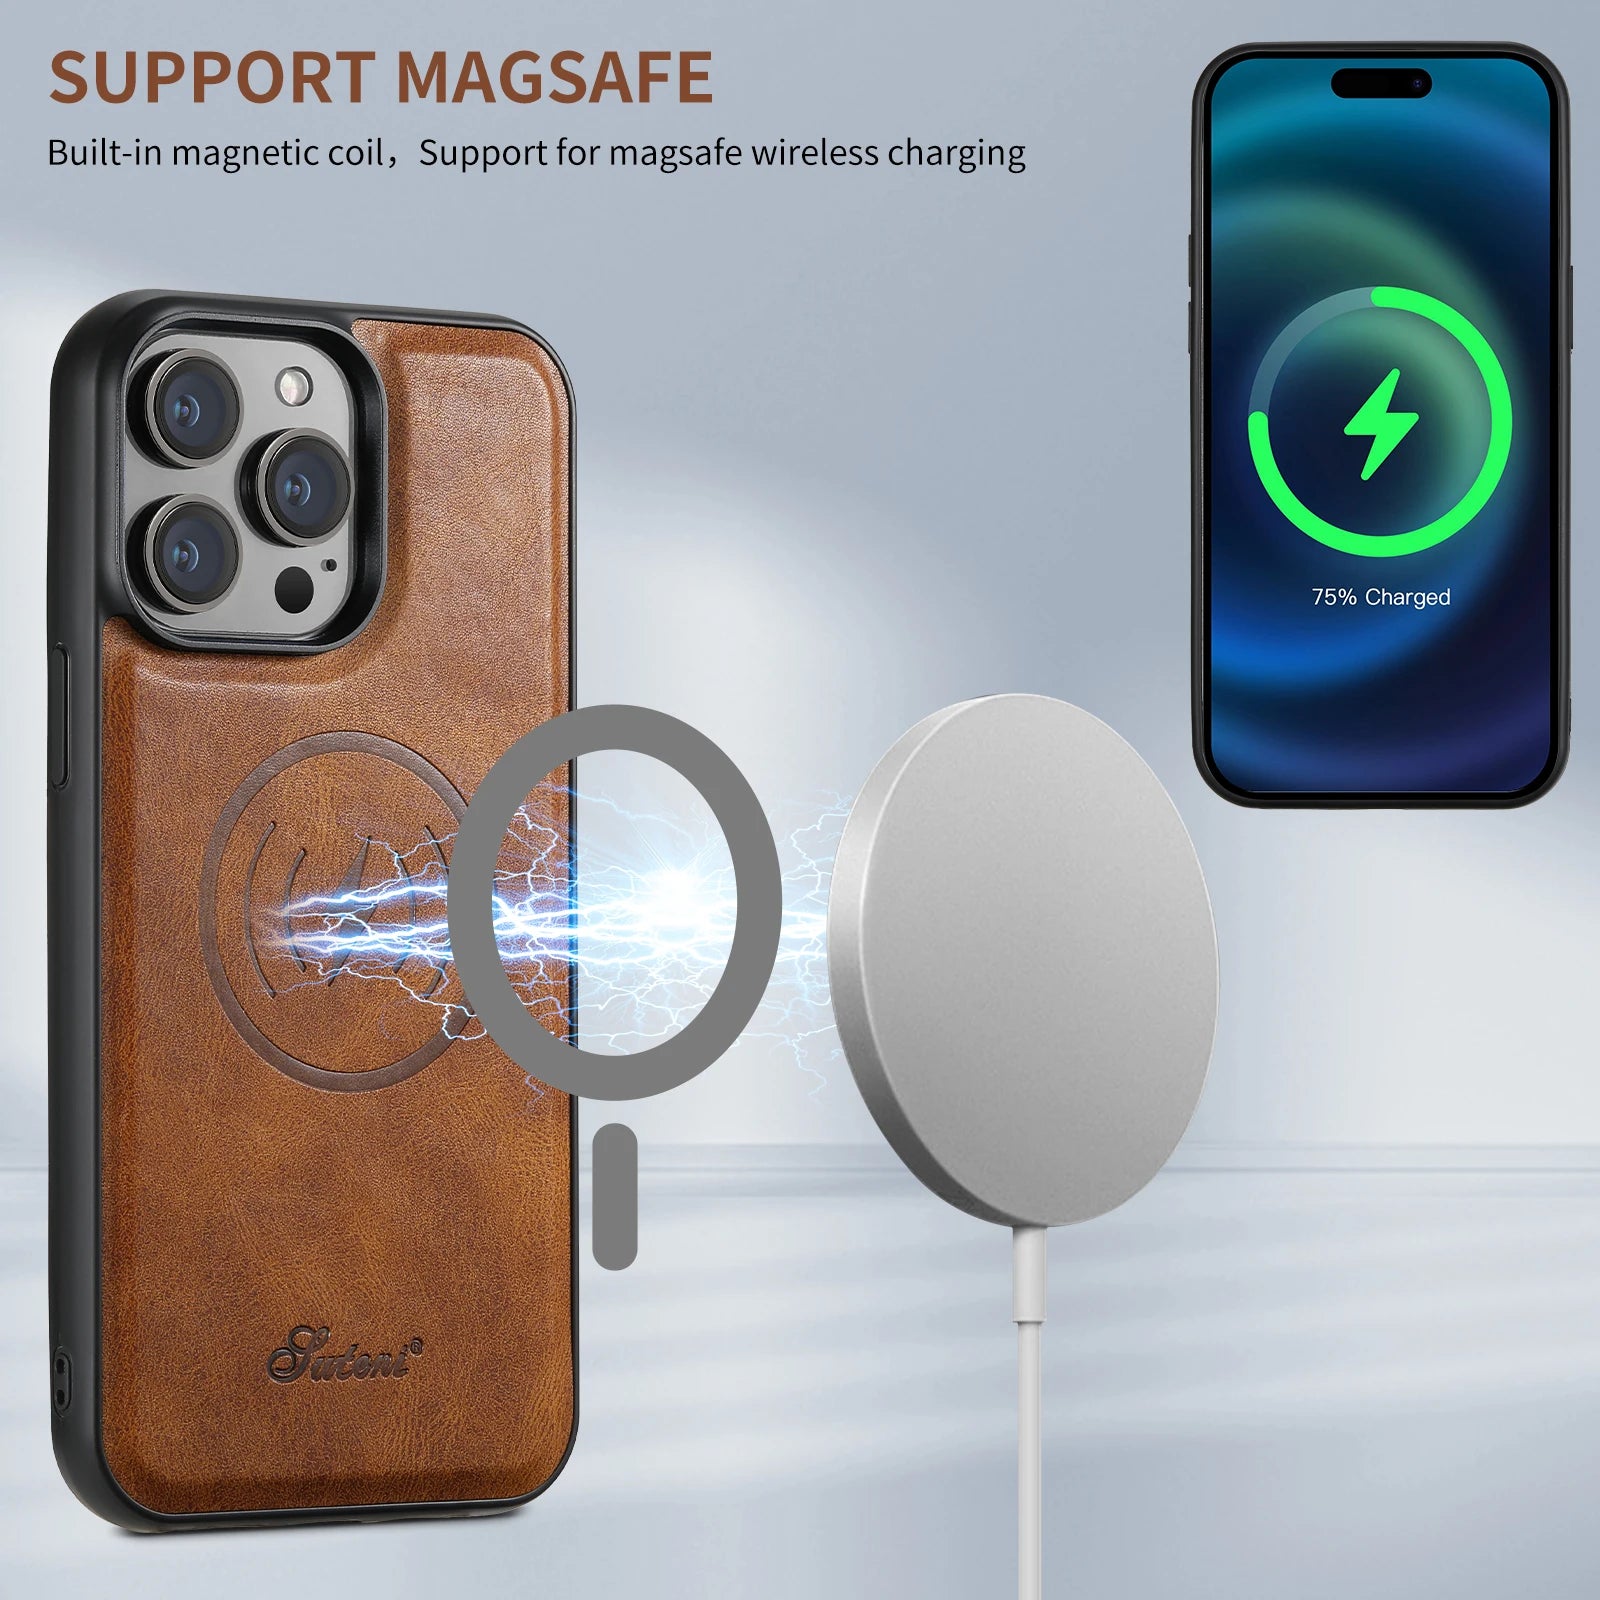 2 In 1 Function Card Bag Magnetic iPhone Case - DealJustDeal